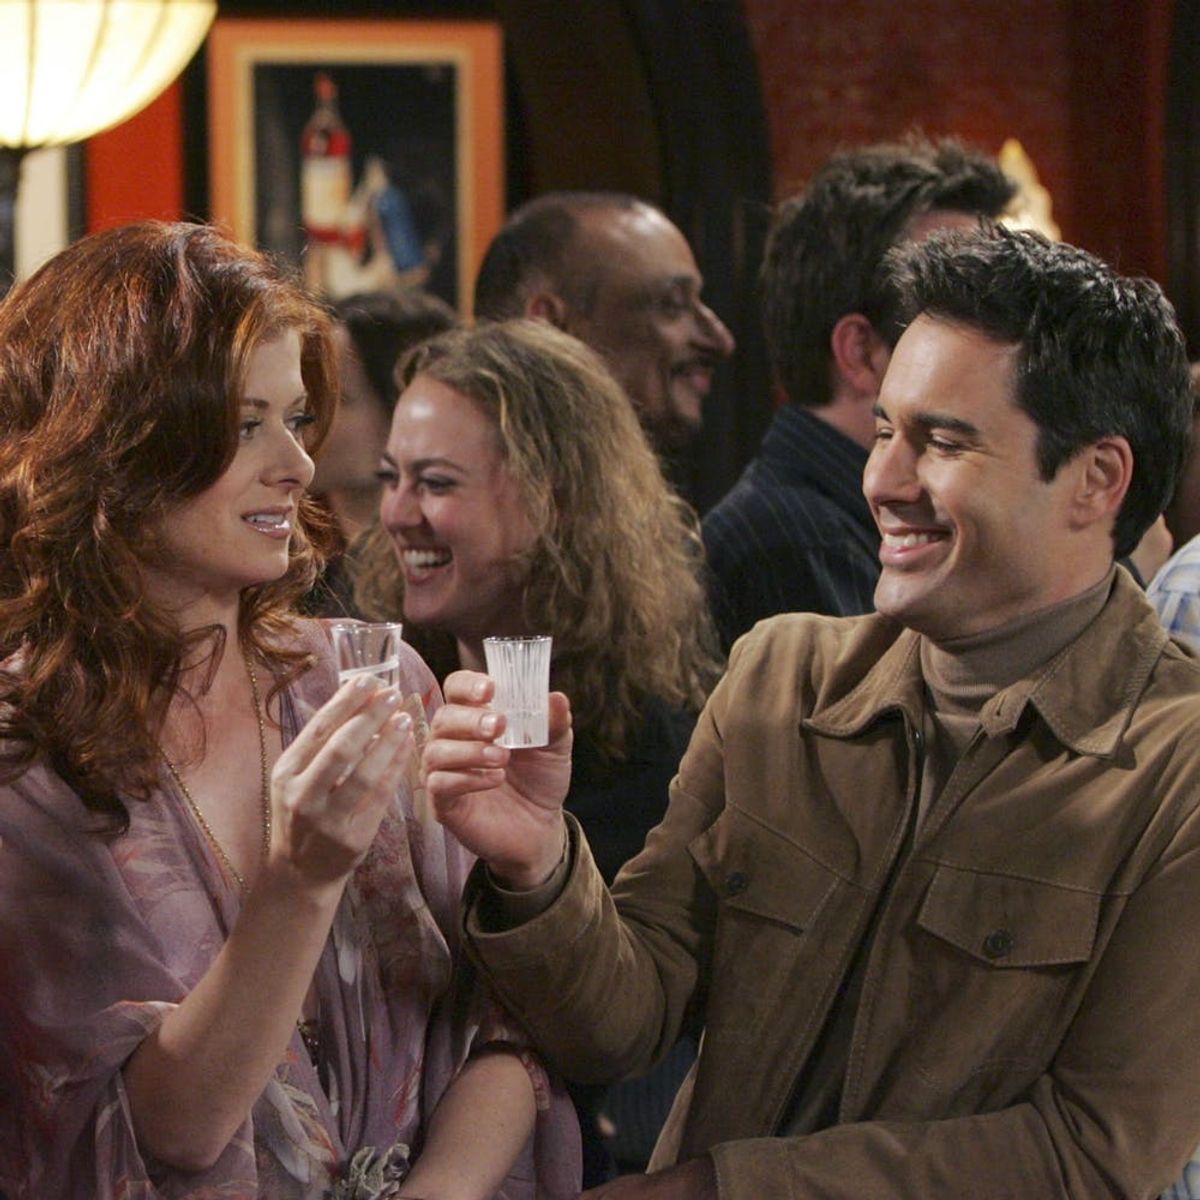 You Can Stream All Eight Seasons of “Will & Grace” Starting Tomorrow!